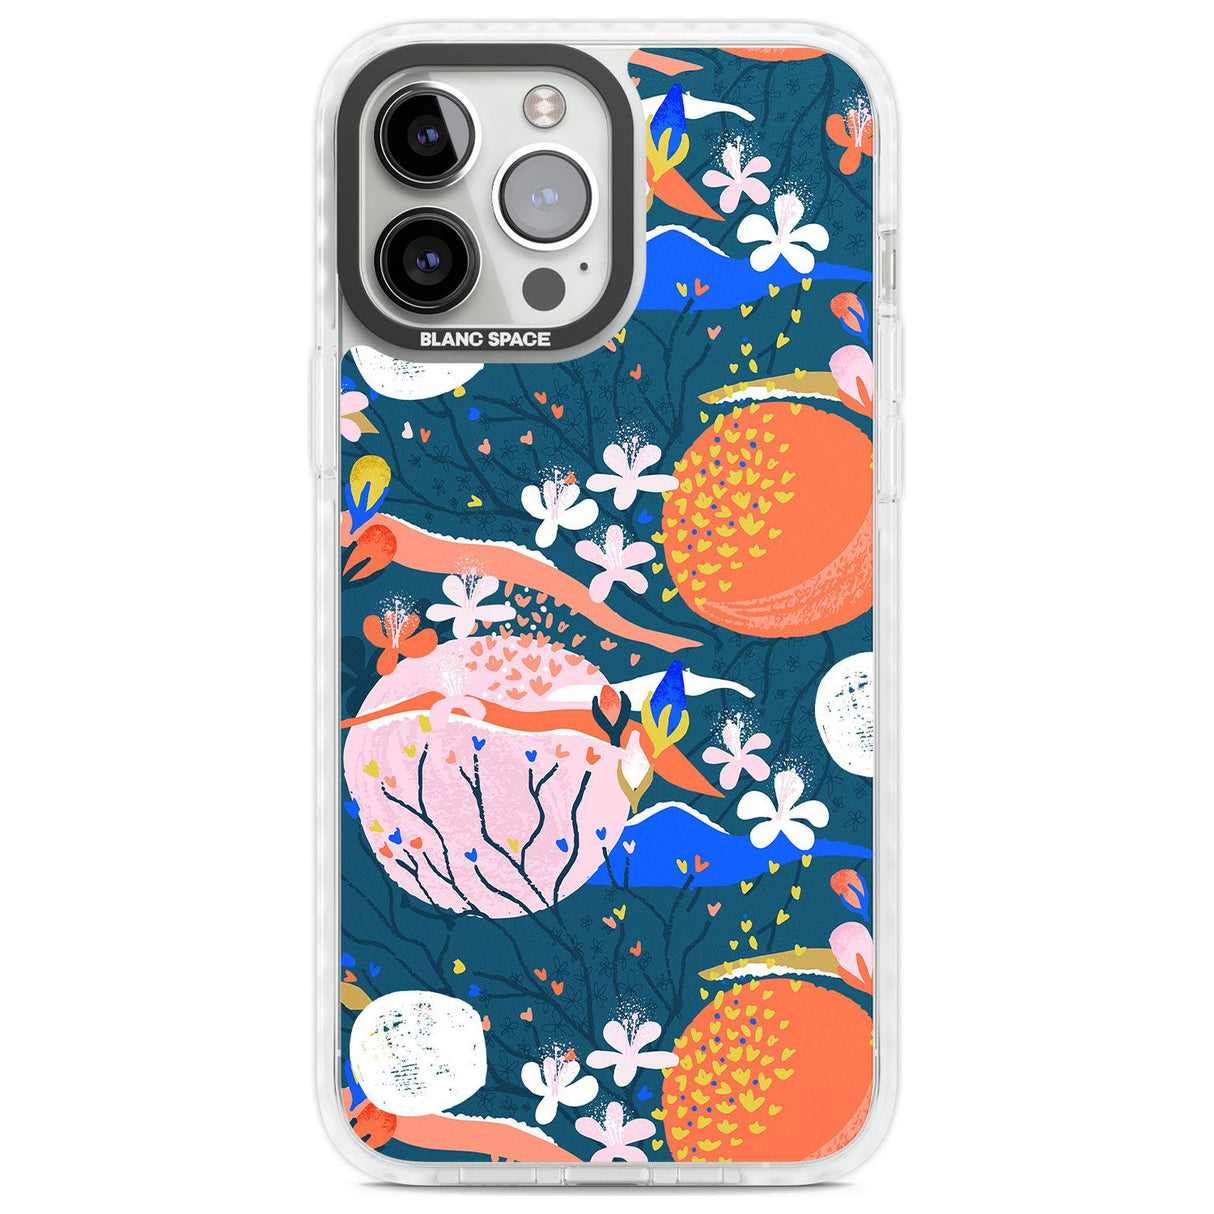 Bright Circles Abstract Phone Case iPhone 13 Pro Max / Impact Case,iPhone 14 Pro Max / Impact Case Blanc Space